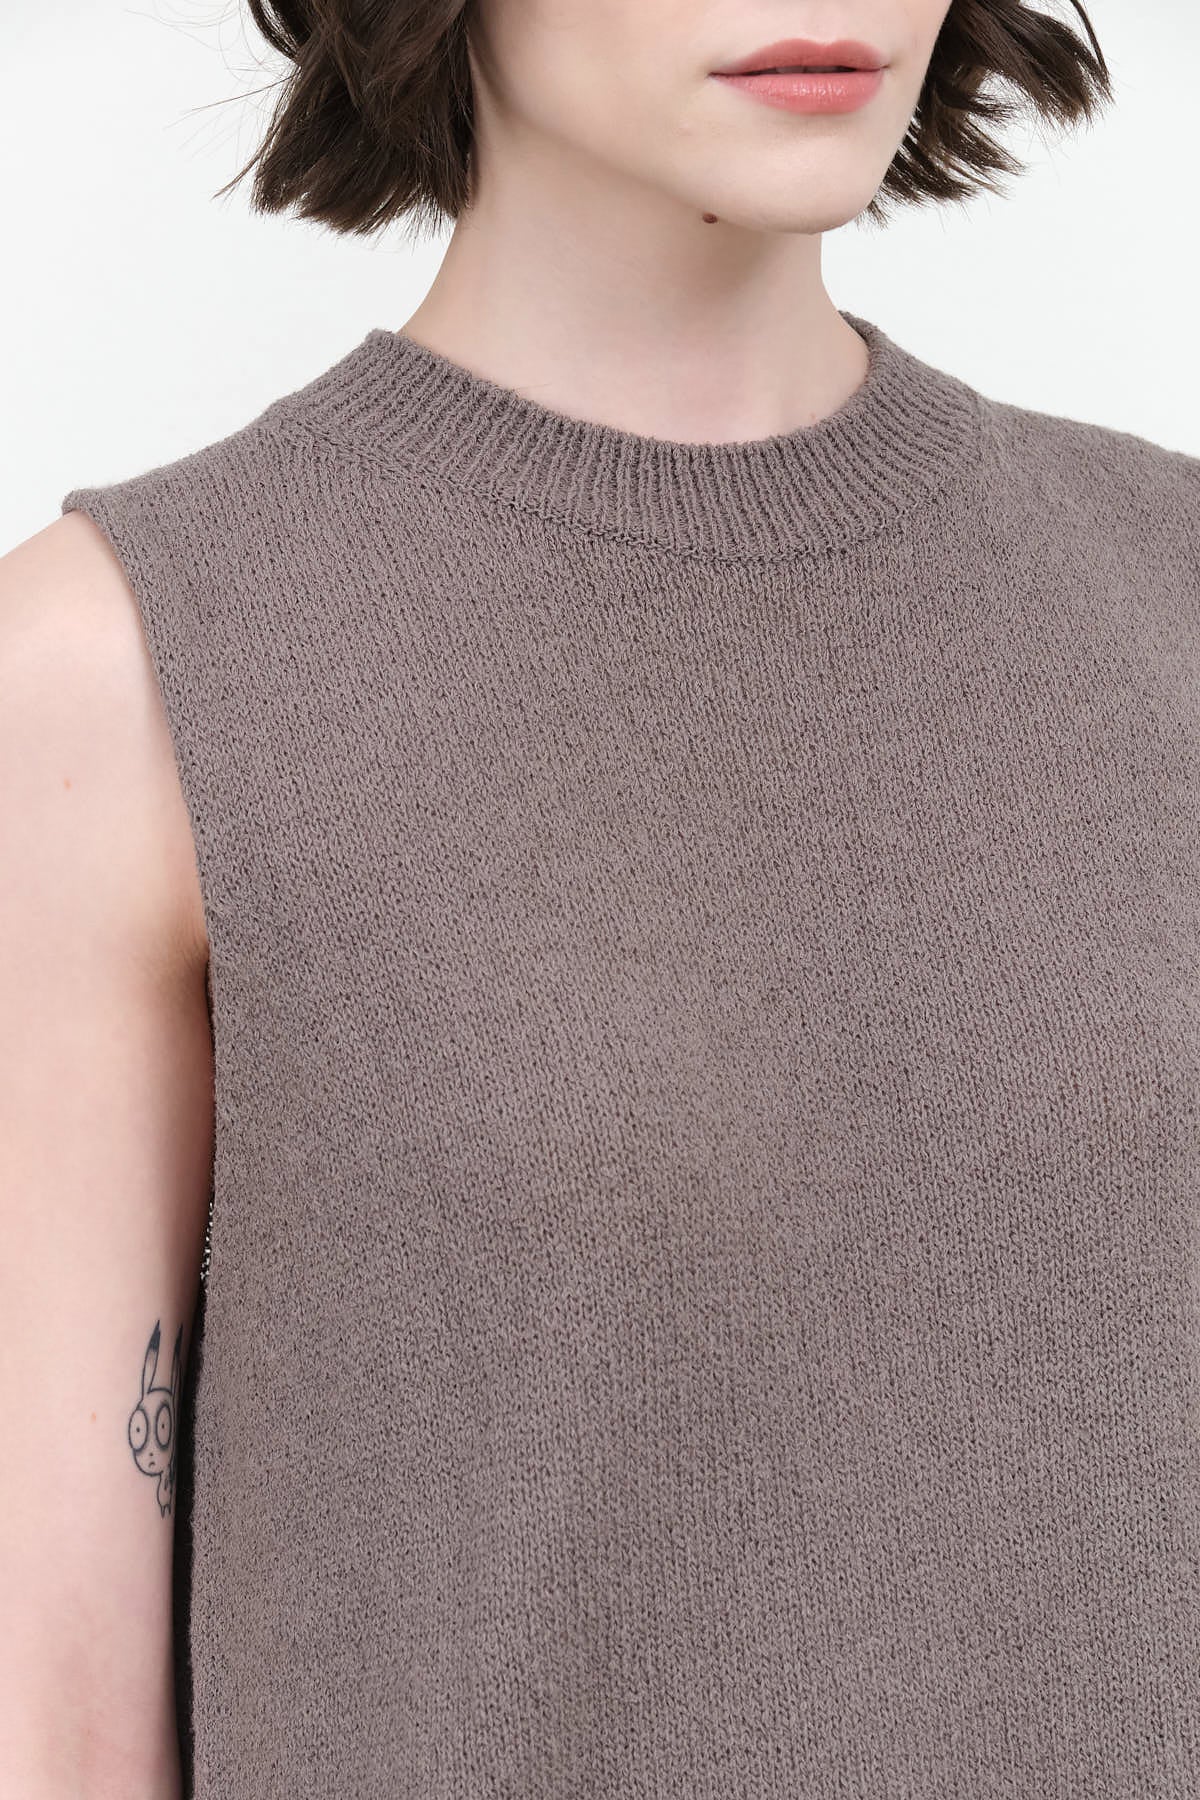 Collar view of Wool Lily Vest in Otter Gray